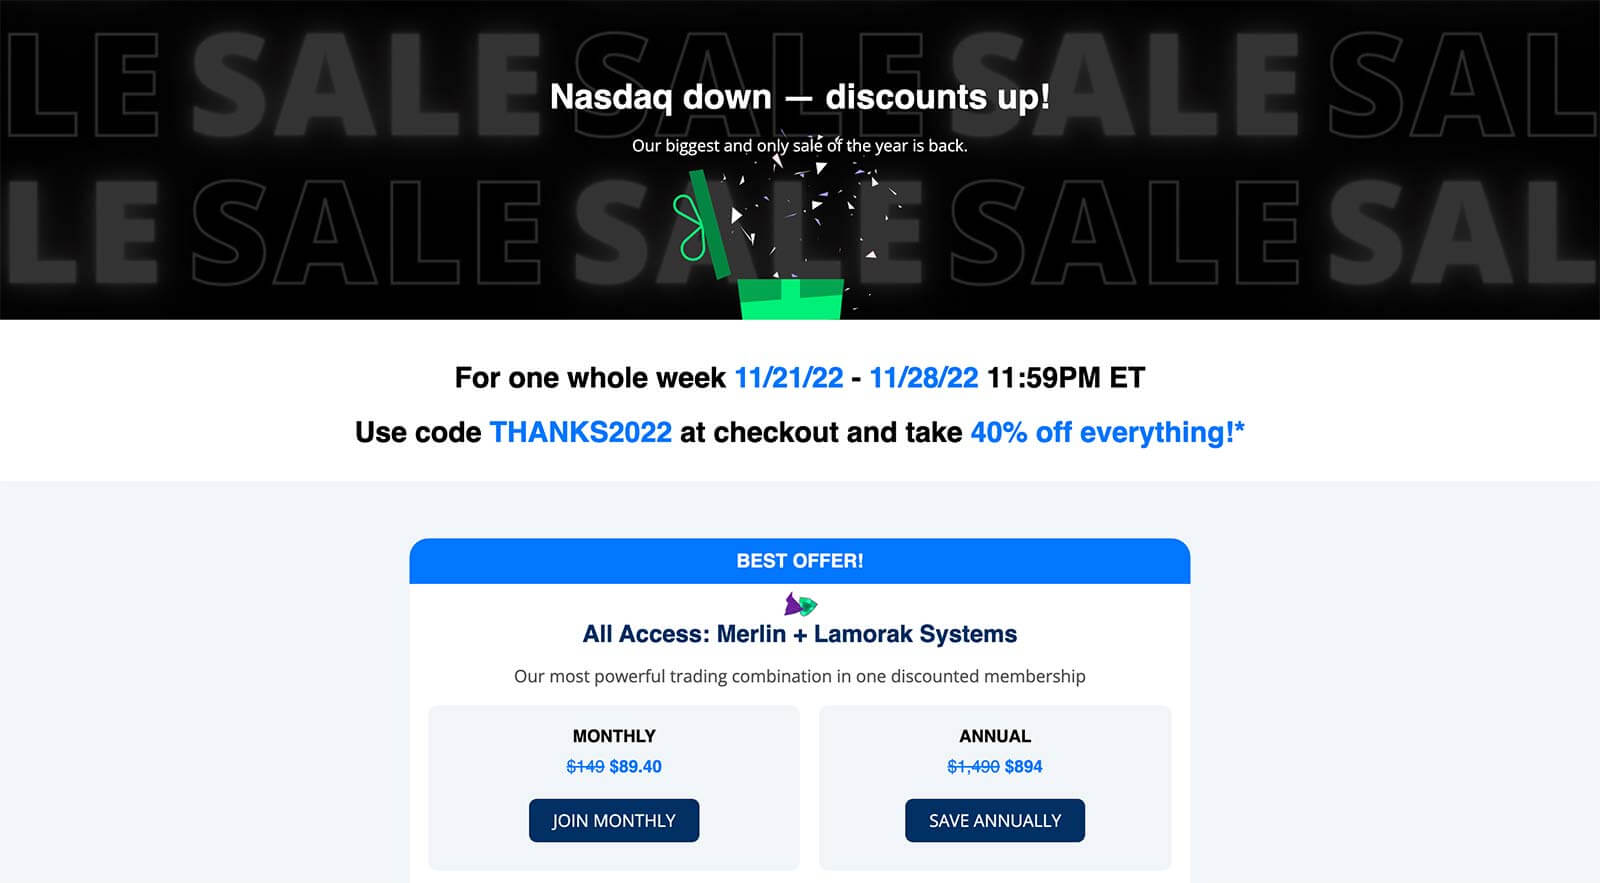 The Trade Risk Black Friday Sale Landing Page